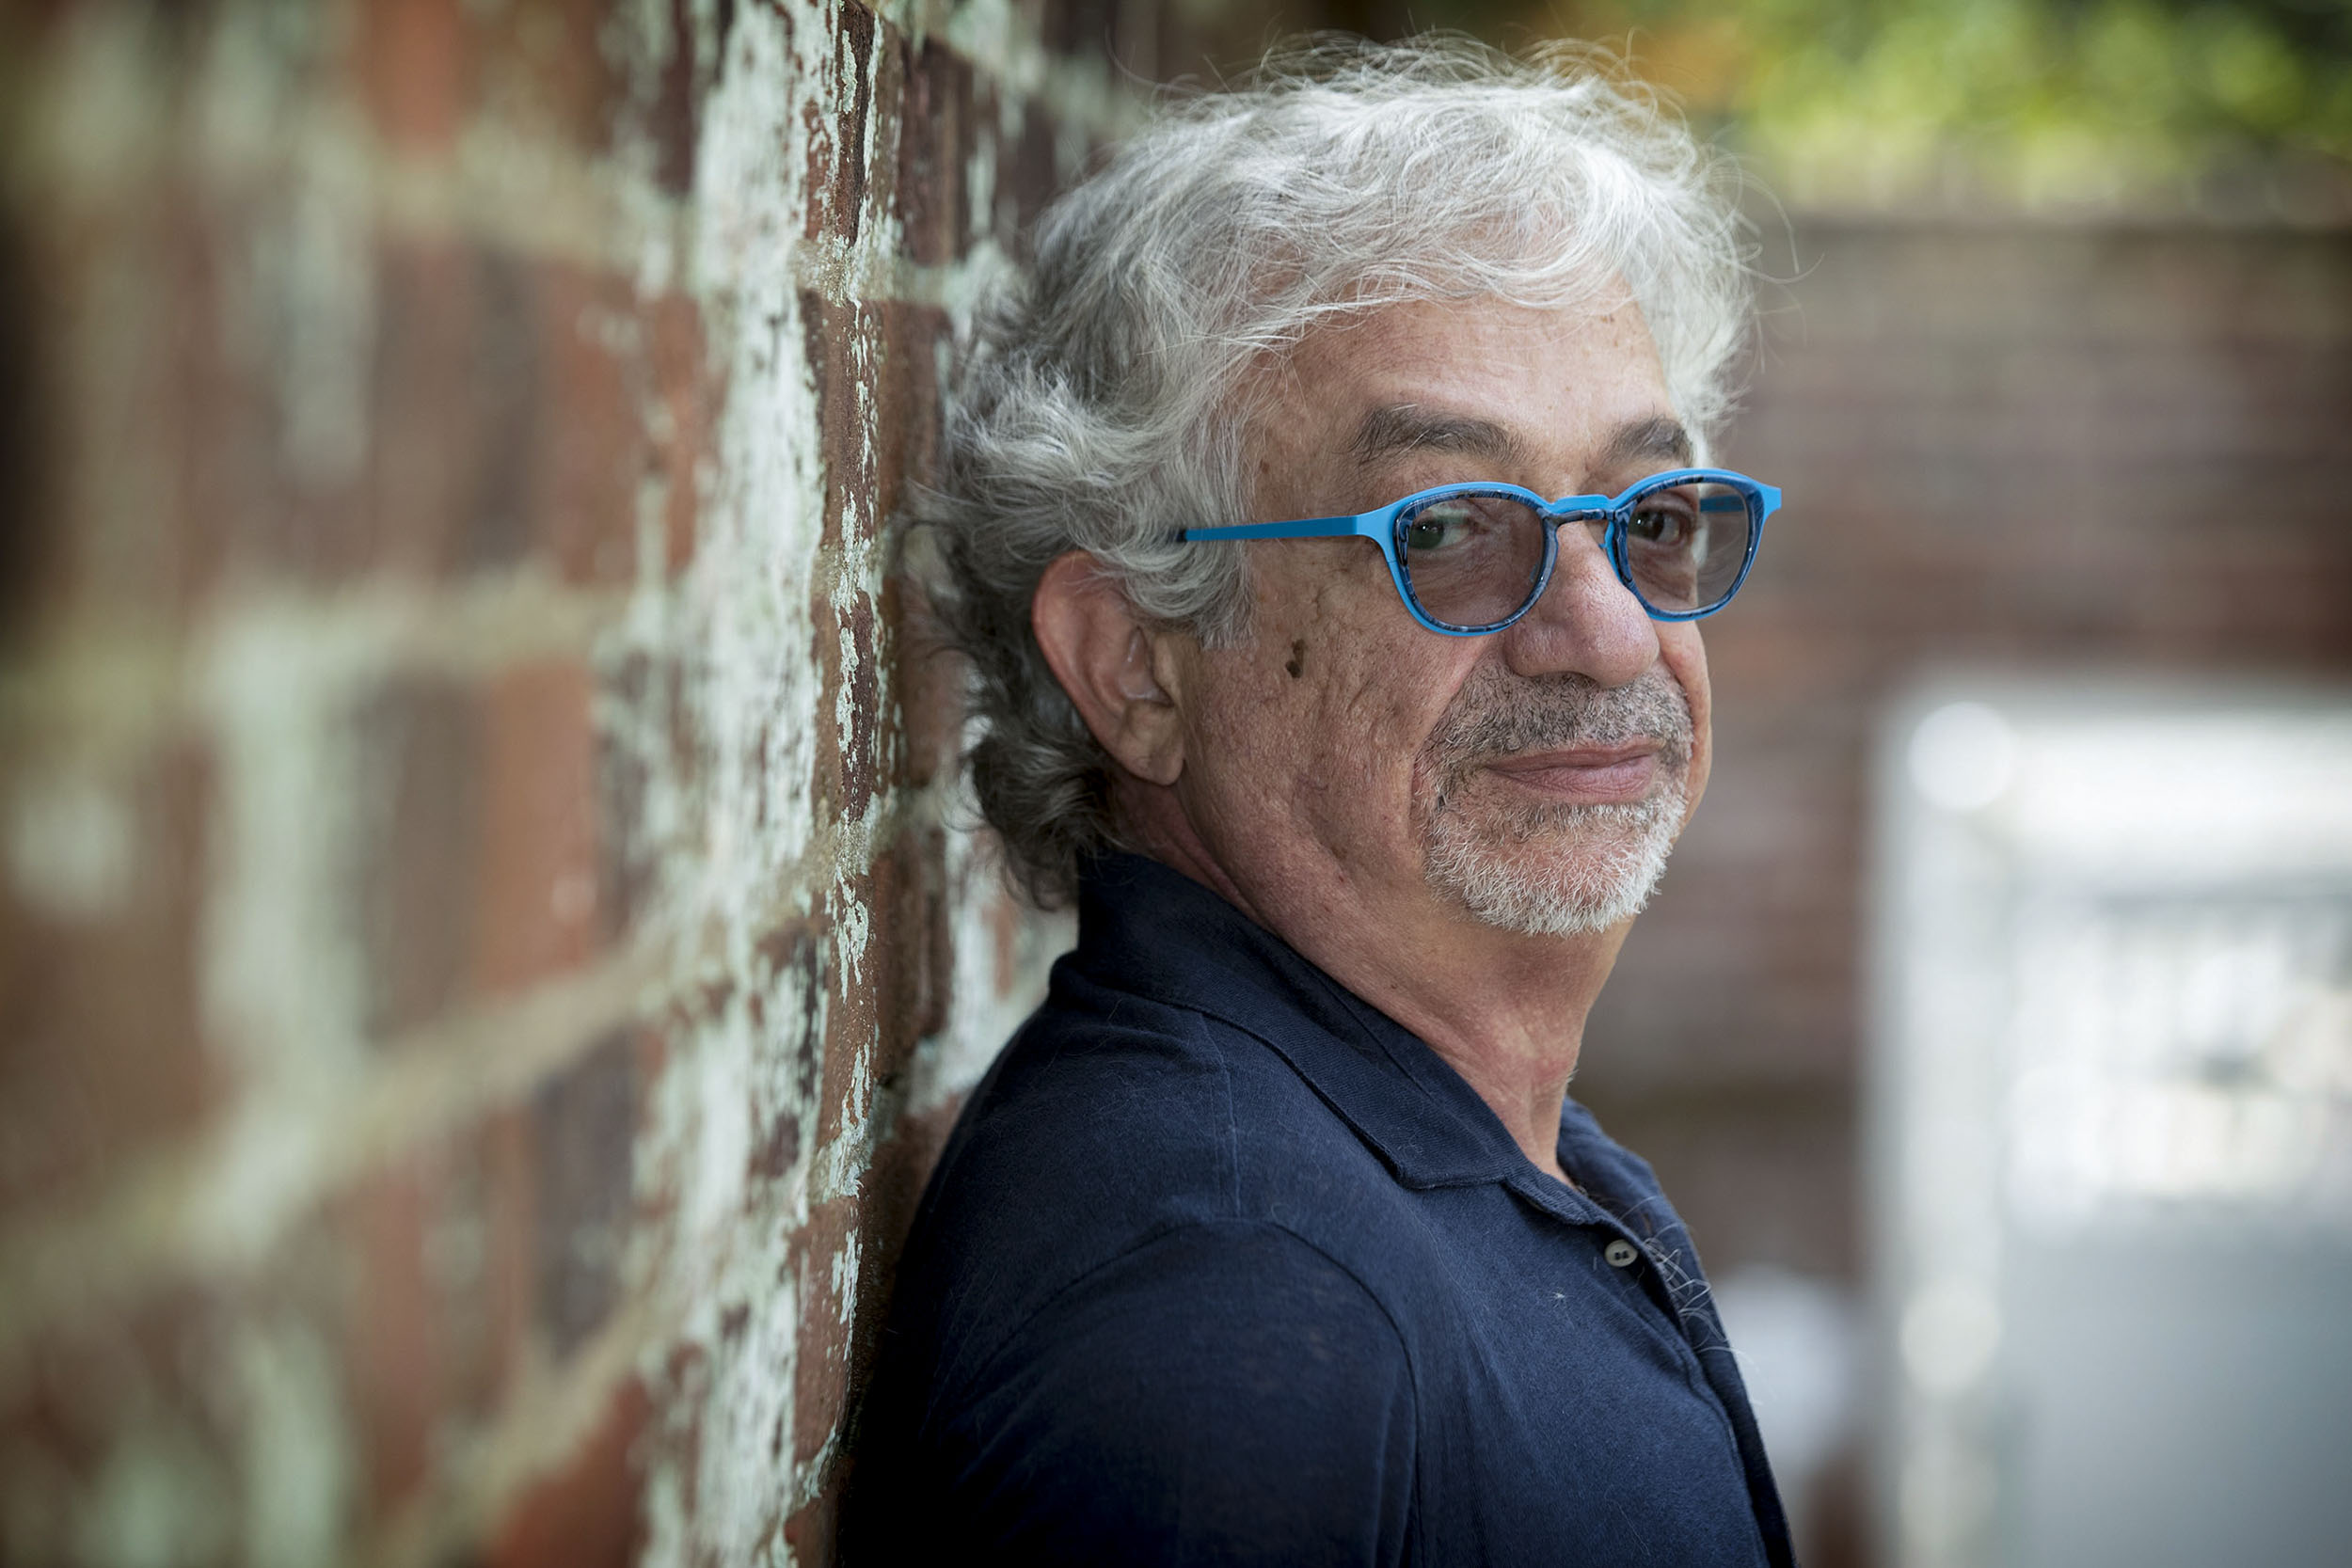 With his sixth novel, “The Wrong End of the Telescope,” about to be released, the author, who is Lebanese American and was born in Jordan, brings his varied experience to the Grounds. (Photo by Dan Addison, University Communications)